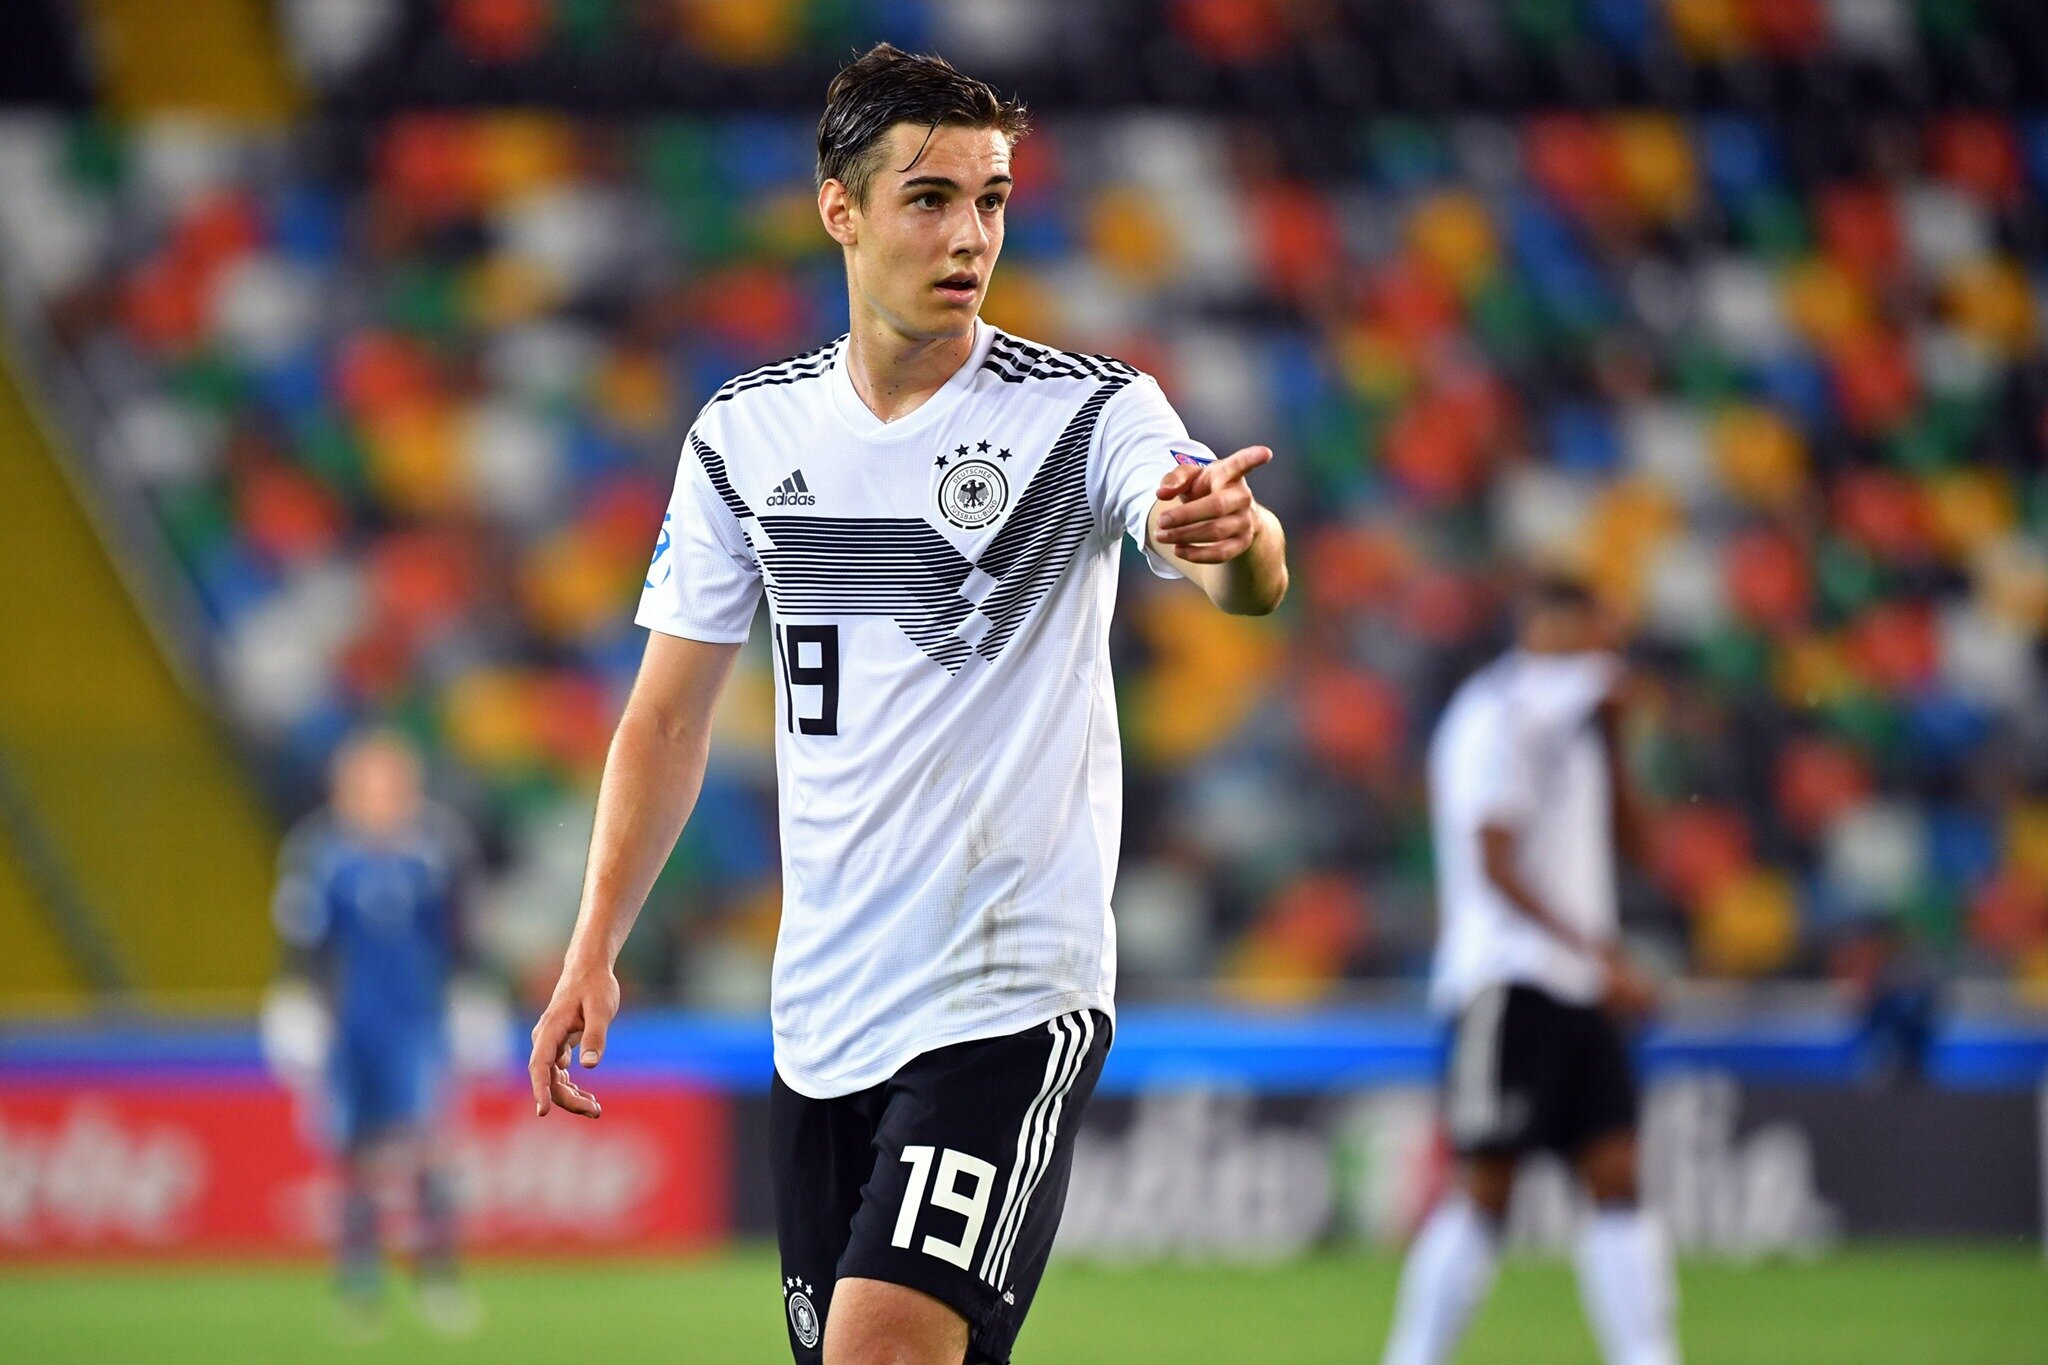 The Youth of today - the best young German footballers - The Sporting Blog